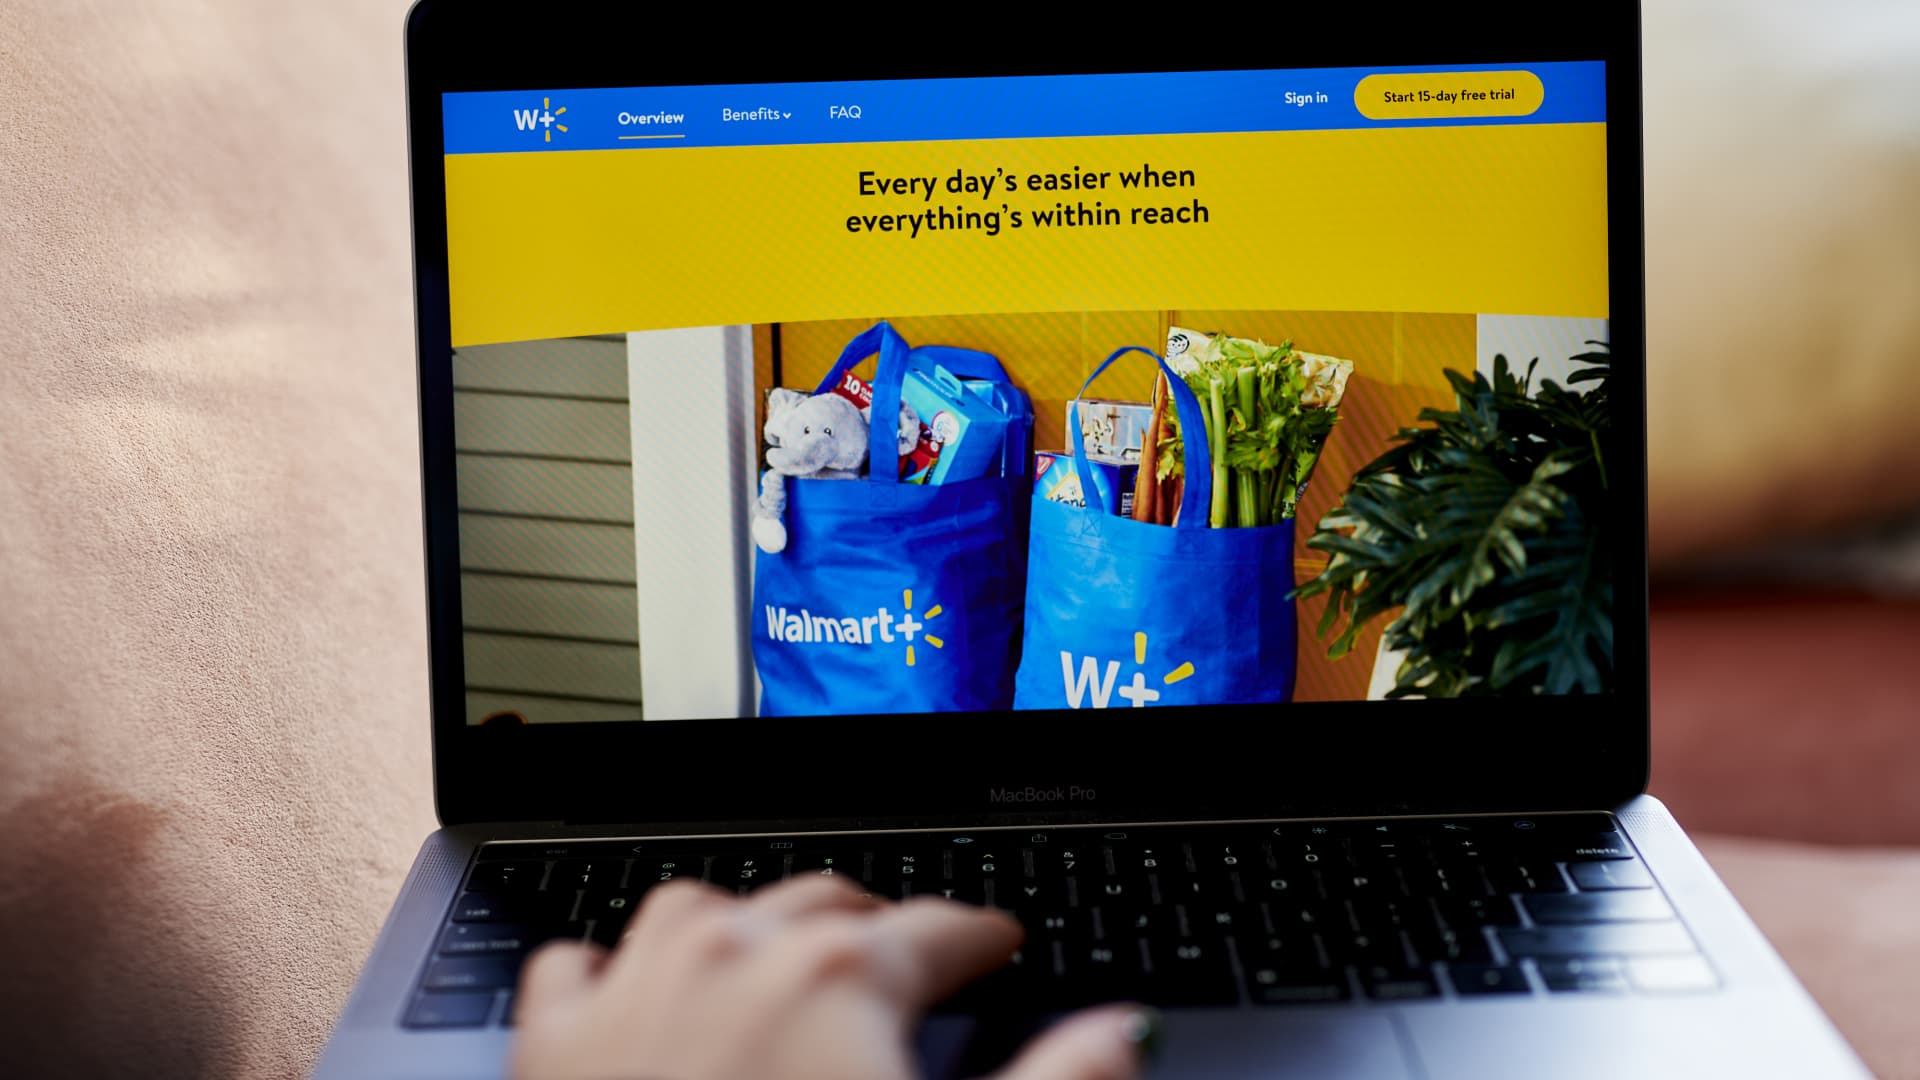 The Walmart+ home screen on a laptop computer in Brooklyn, New York on Wednesday, Nov. 18, 2020.